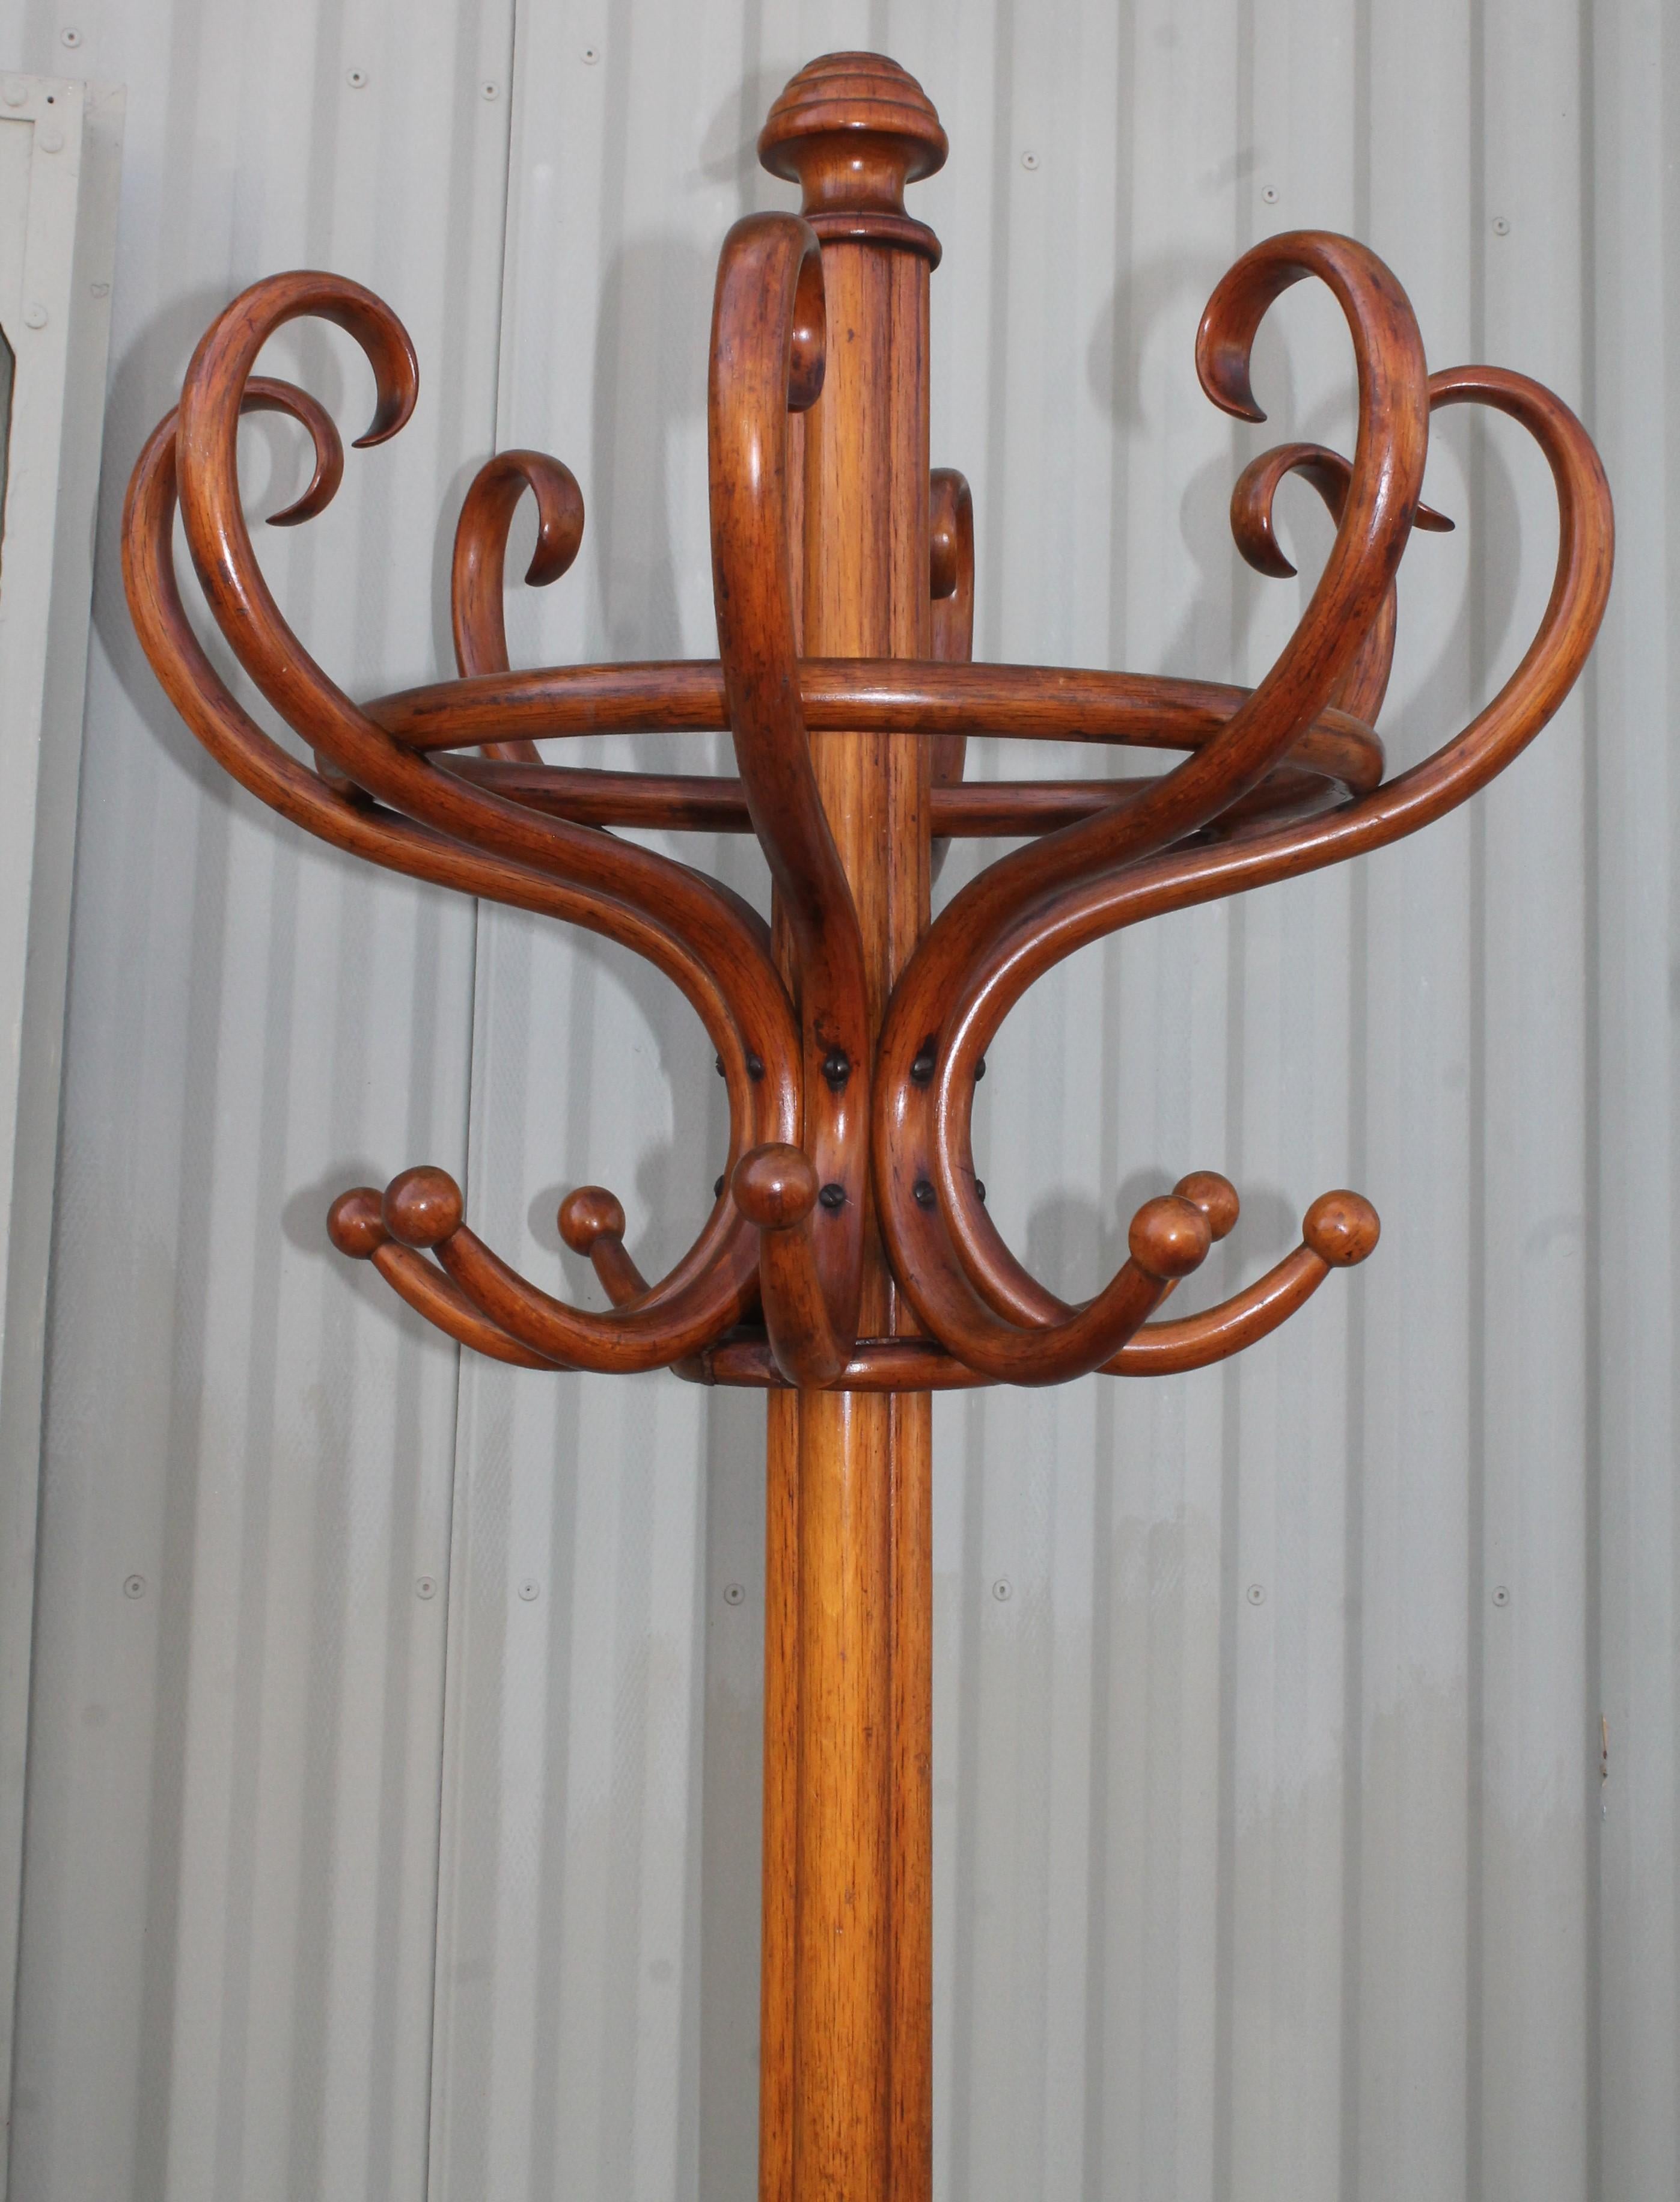 This fine old hickory bentwood hat & cot rack is in fine condition. It has a fantastic aged patina and is in fine condition. This a very heavy and sturdy coat stand.